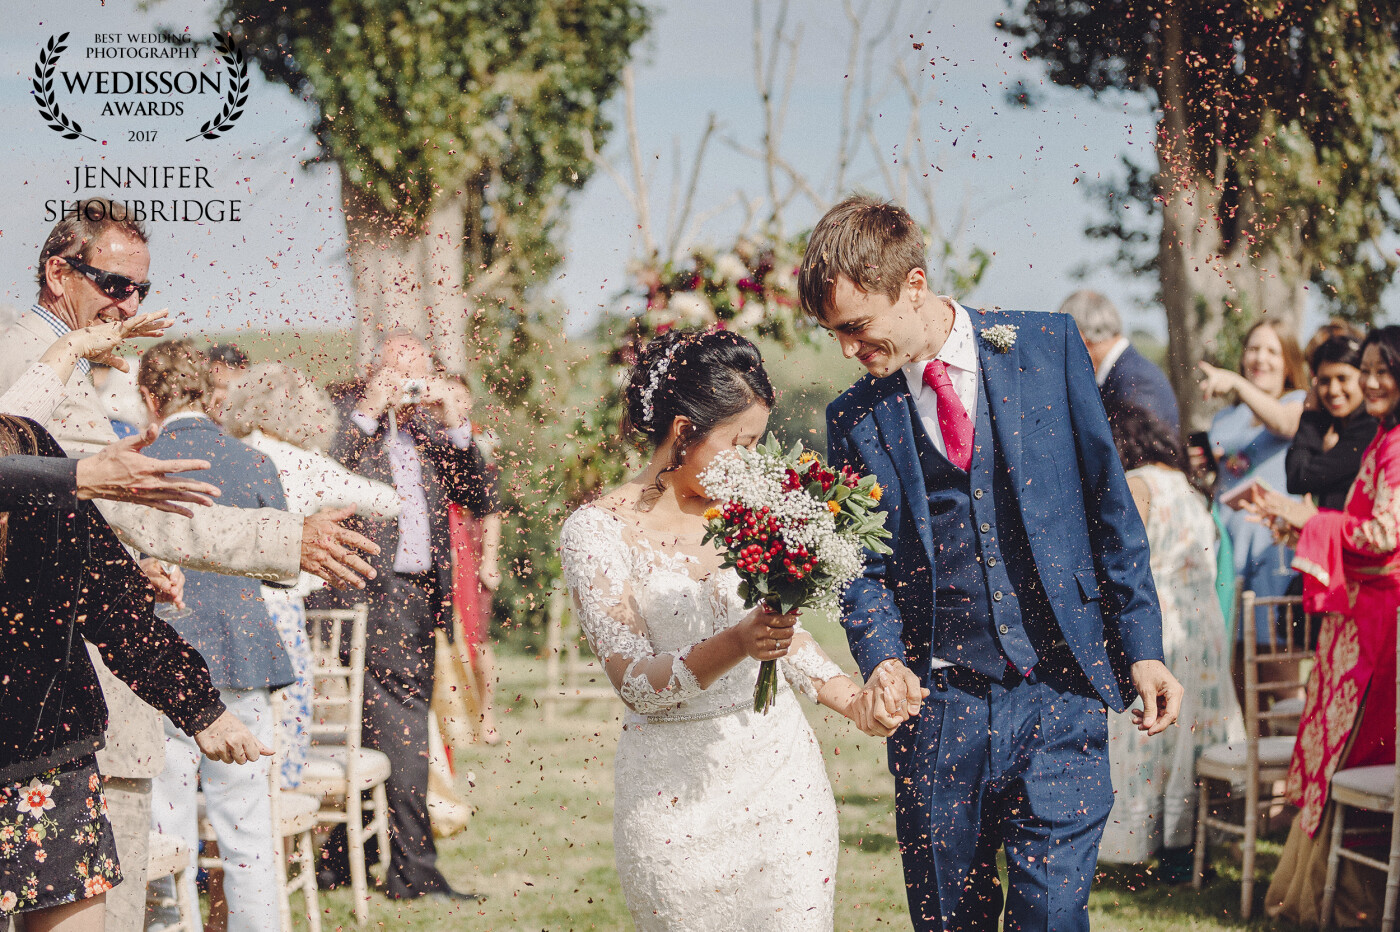 Ollie & Ichha had just got married and were walking up the aisle through a confetti throw. I had dozens of shots, but this one just caught my eye the most as they both turned their heads towards each other, using the bouquet for cover as the confetti shower got more enthusiastic